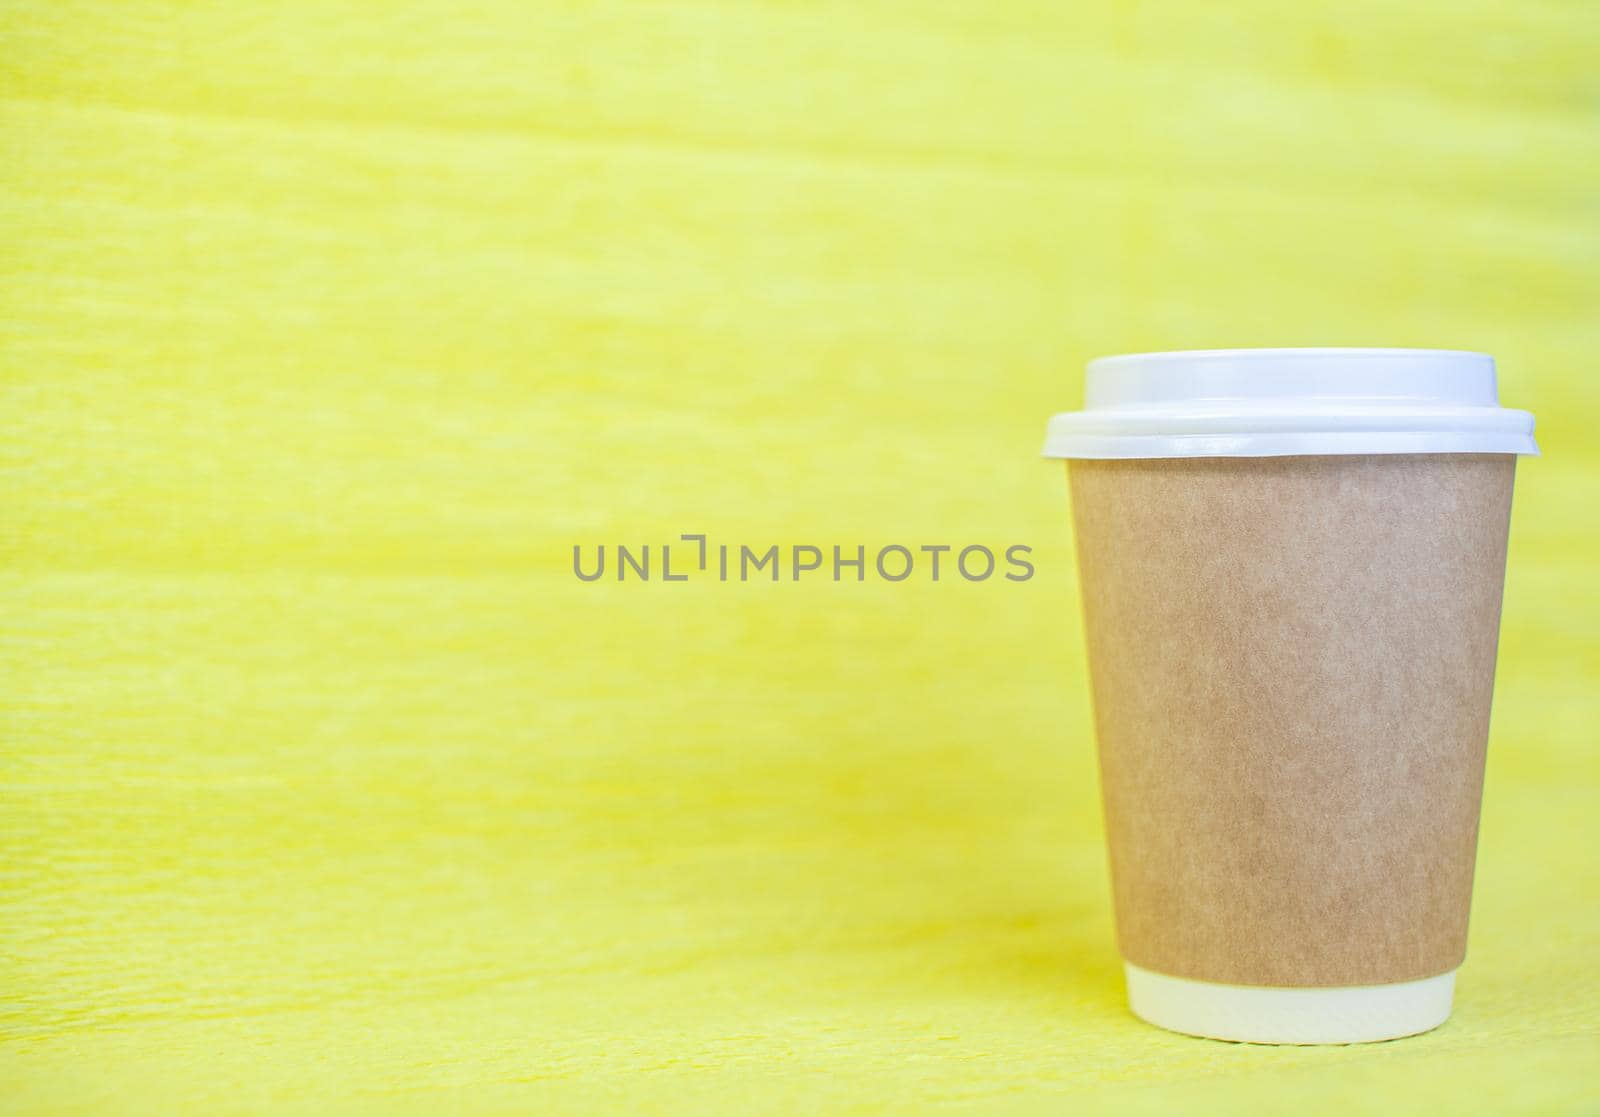 Paper cup of coffee closed with a white lid on a yellow background. There is a place for the text.